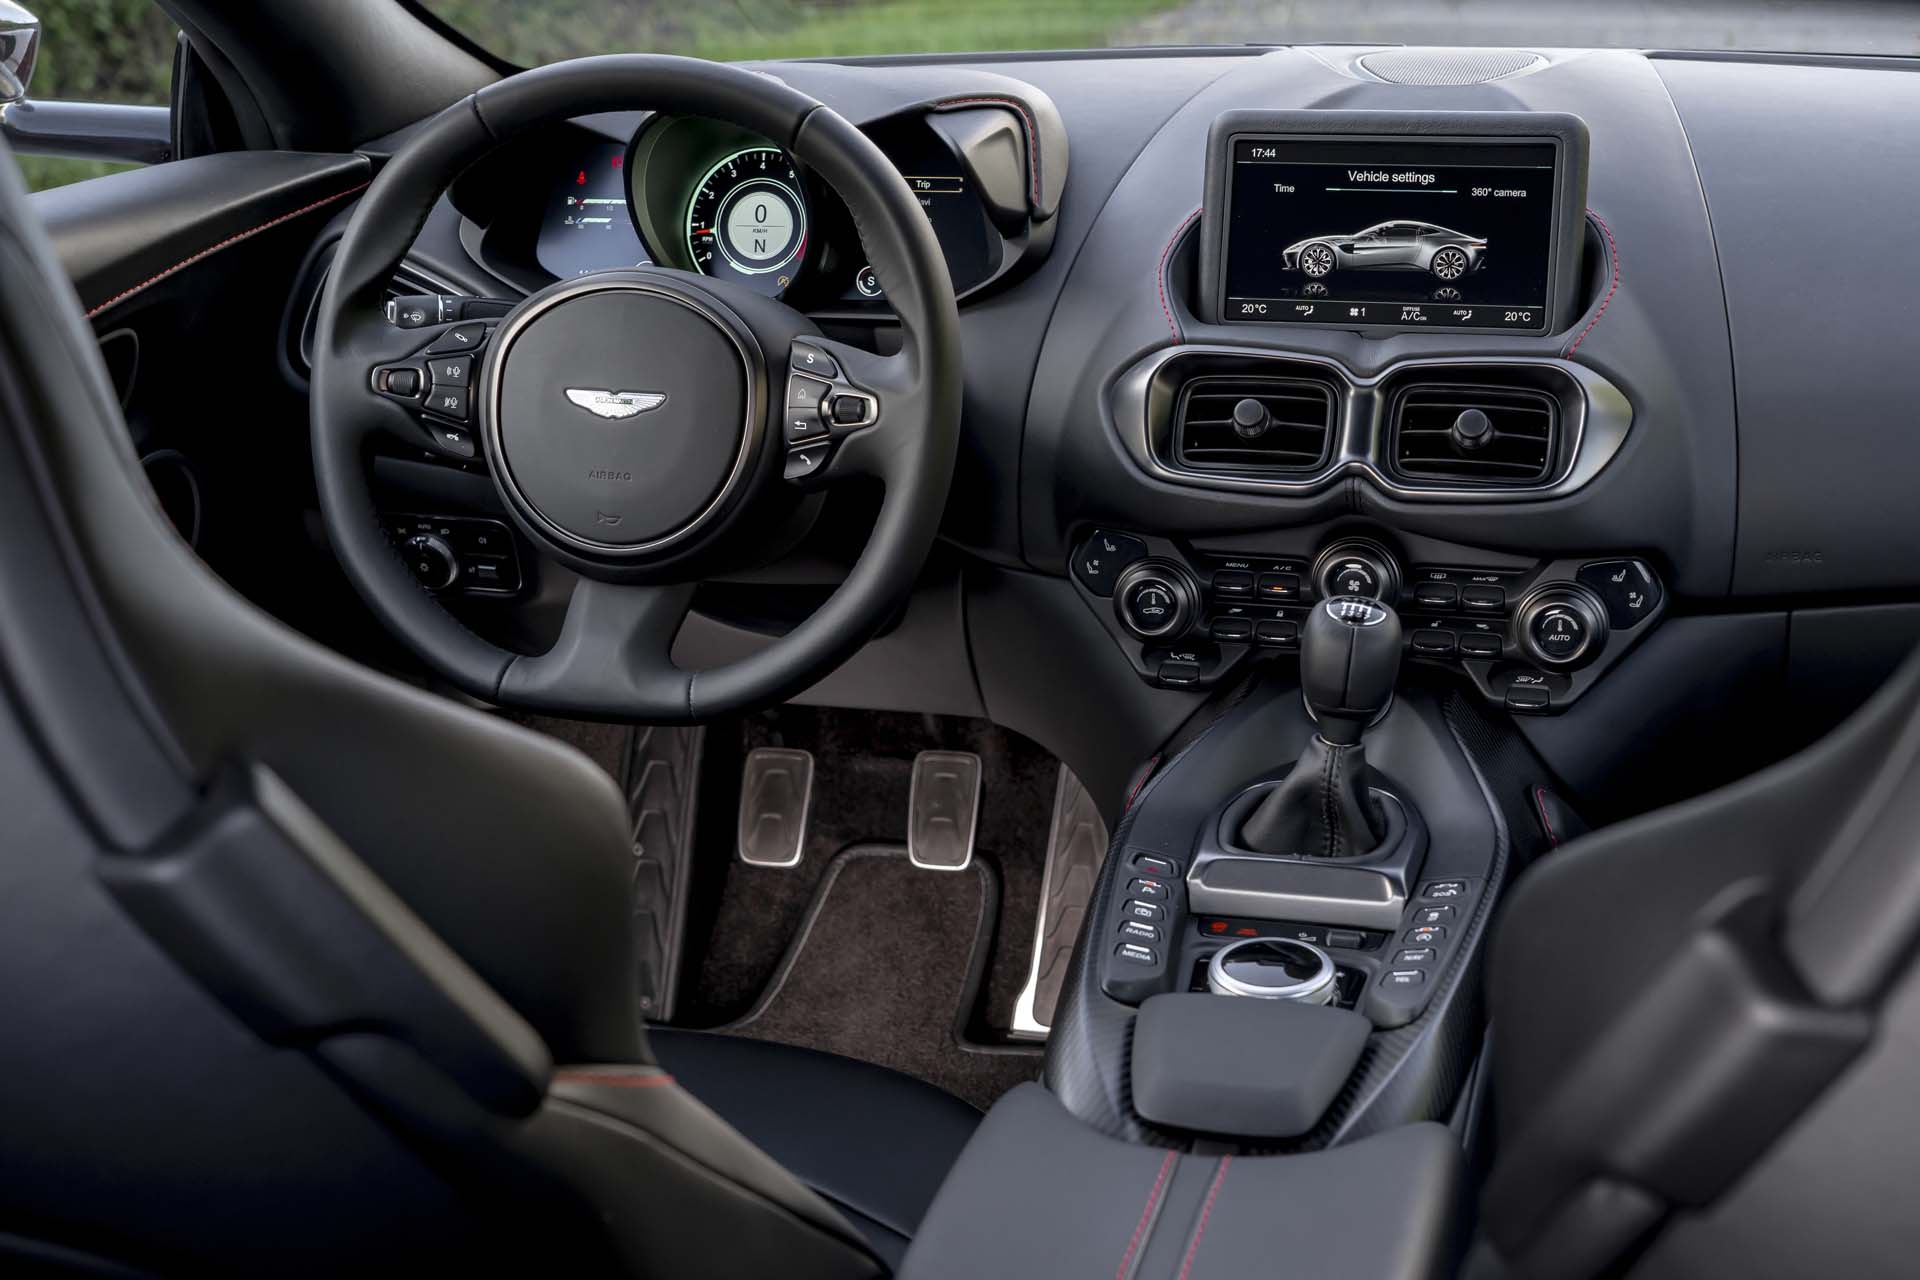 verzameling in het geheim Milieuactivist Aston Martin to phase out manual transmission by 2022